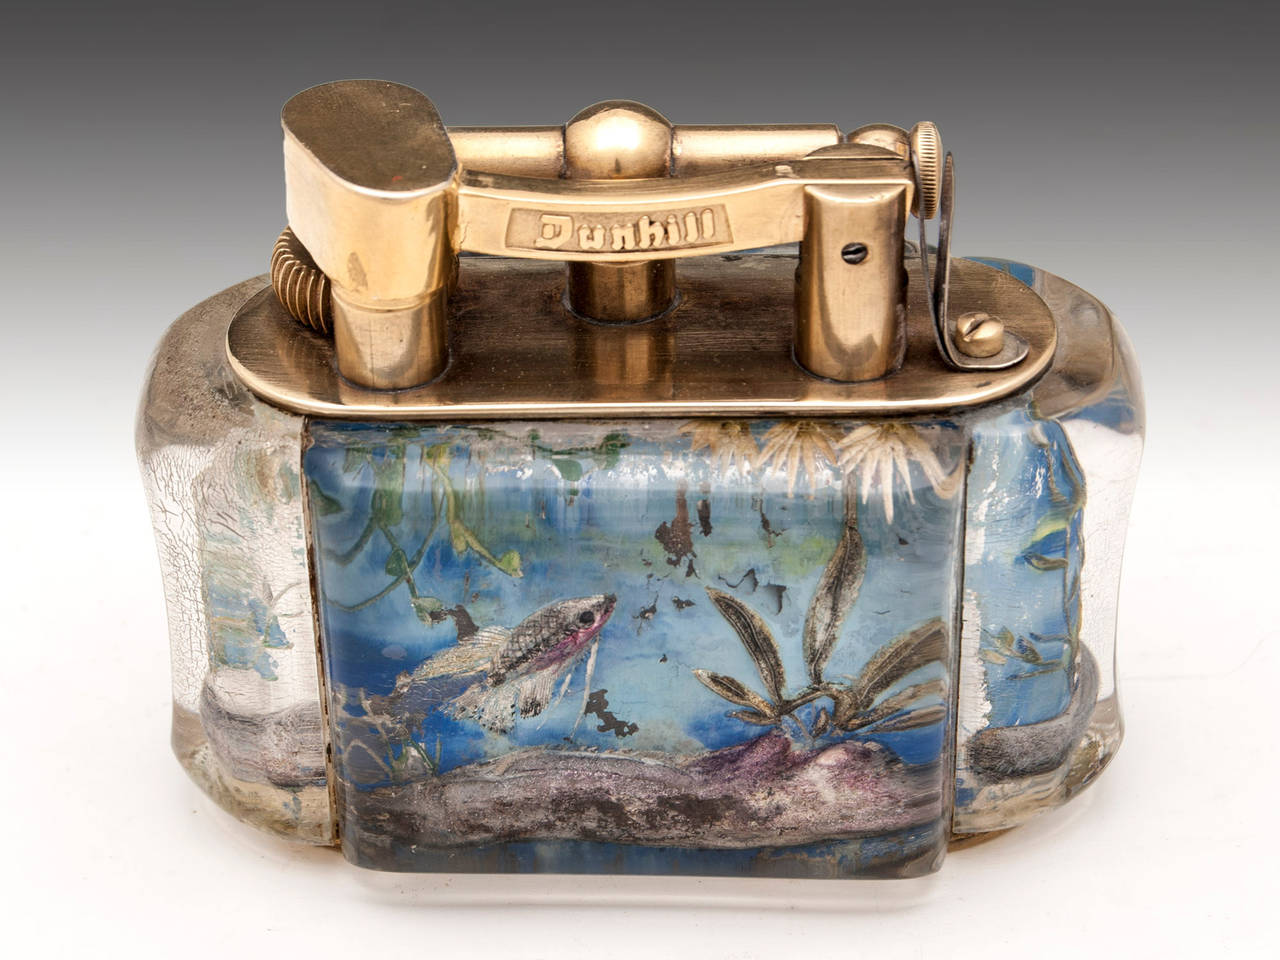 Aquarium table cigarette lighter by Alfred Dunhill. 

This 